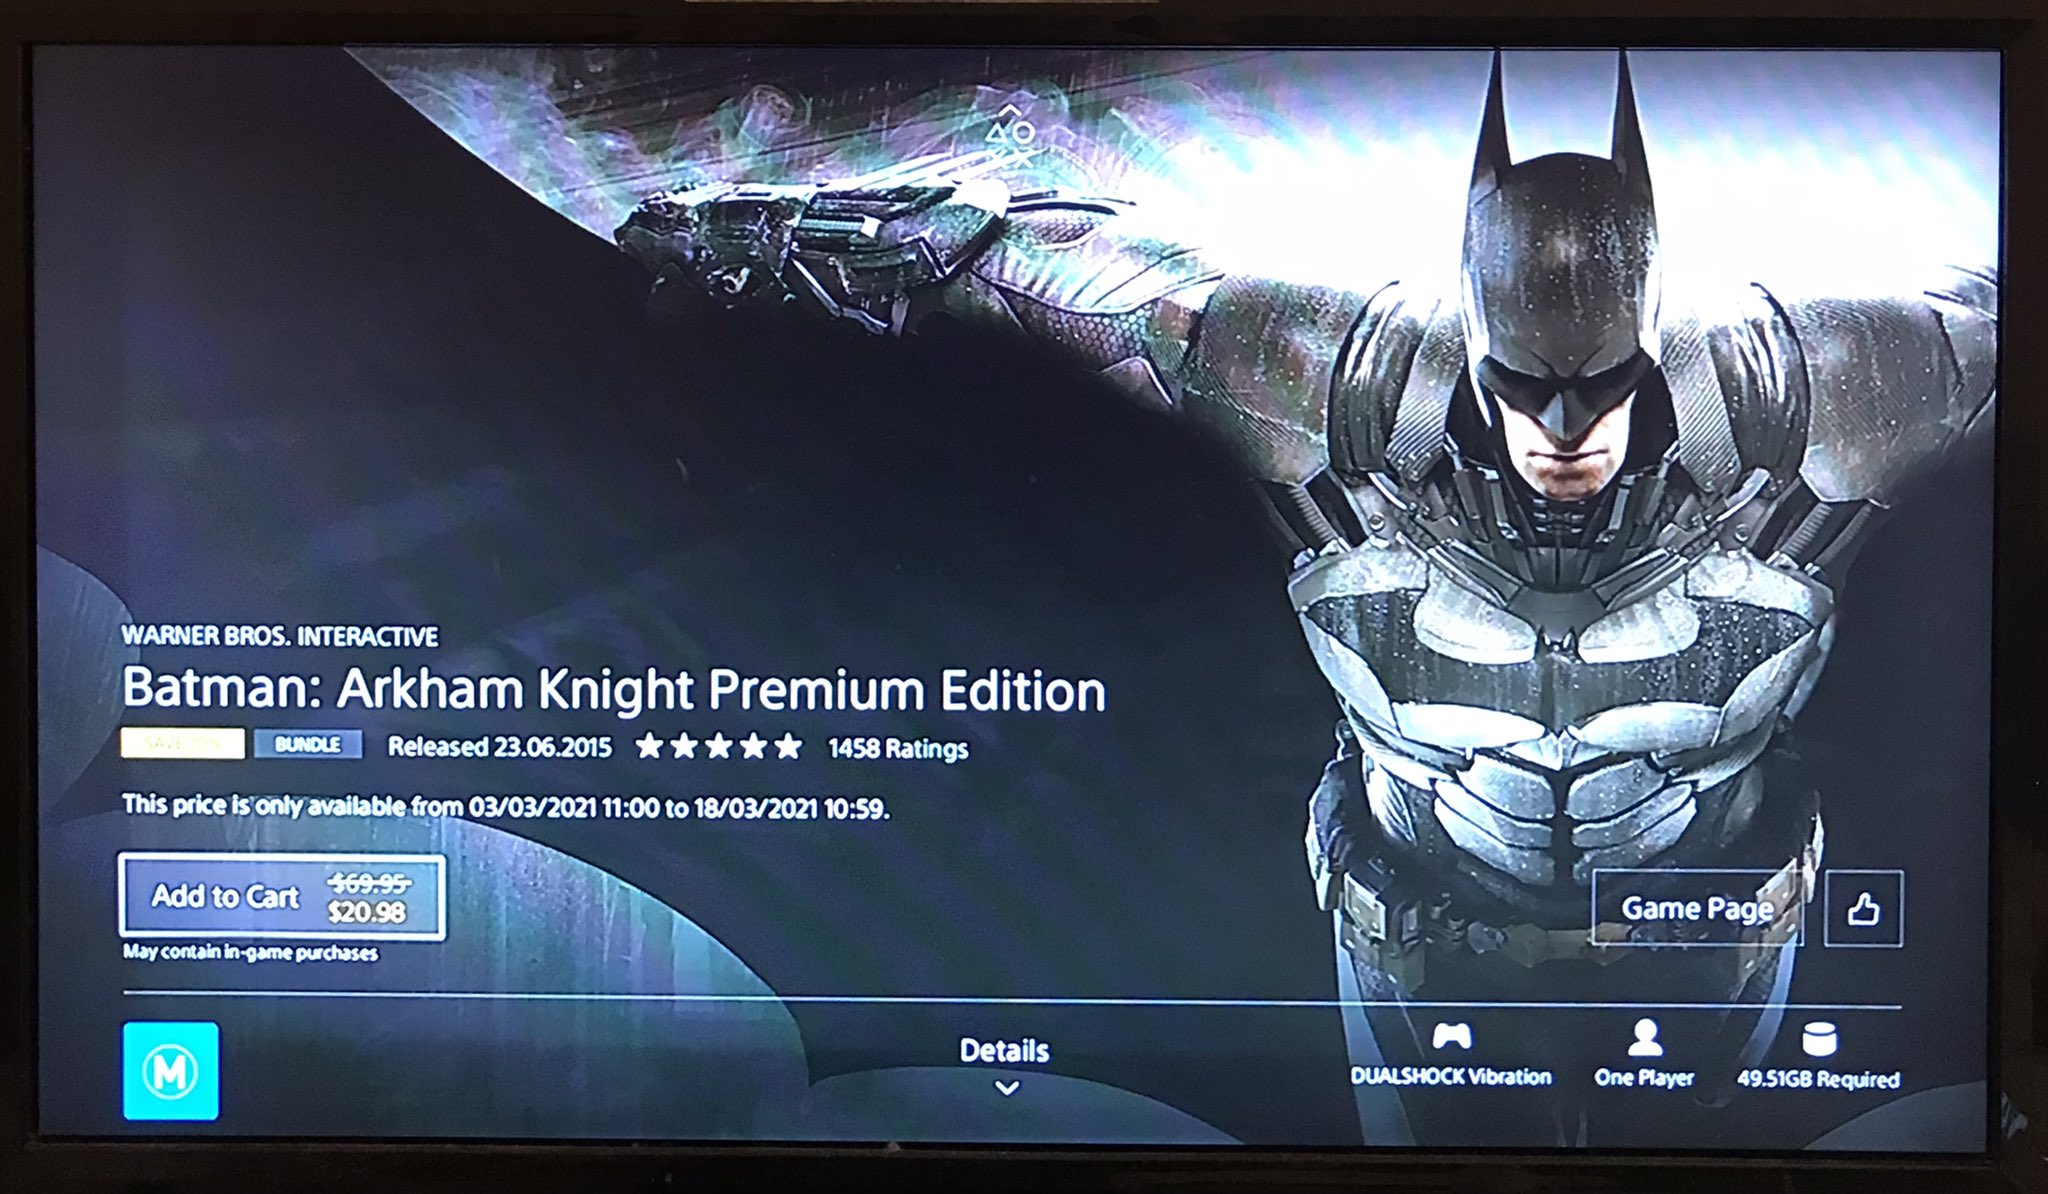 revolución gas principal GameSlayer 🇦🇺 on Twitter: "I Just Brought Batman: Arkham Knight Premium  Edition and Unravel Yarny Bundle on Ps4 #BatmanArkhamKnight #Unravel #Ps4 # PremiumEdition #YarnyBundle #PlaystationStore #Playstation #Gamer #Gaming  https://t.co/RMvWGTbiAT ...